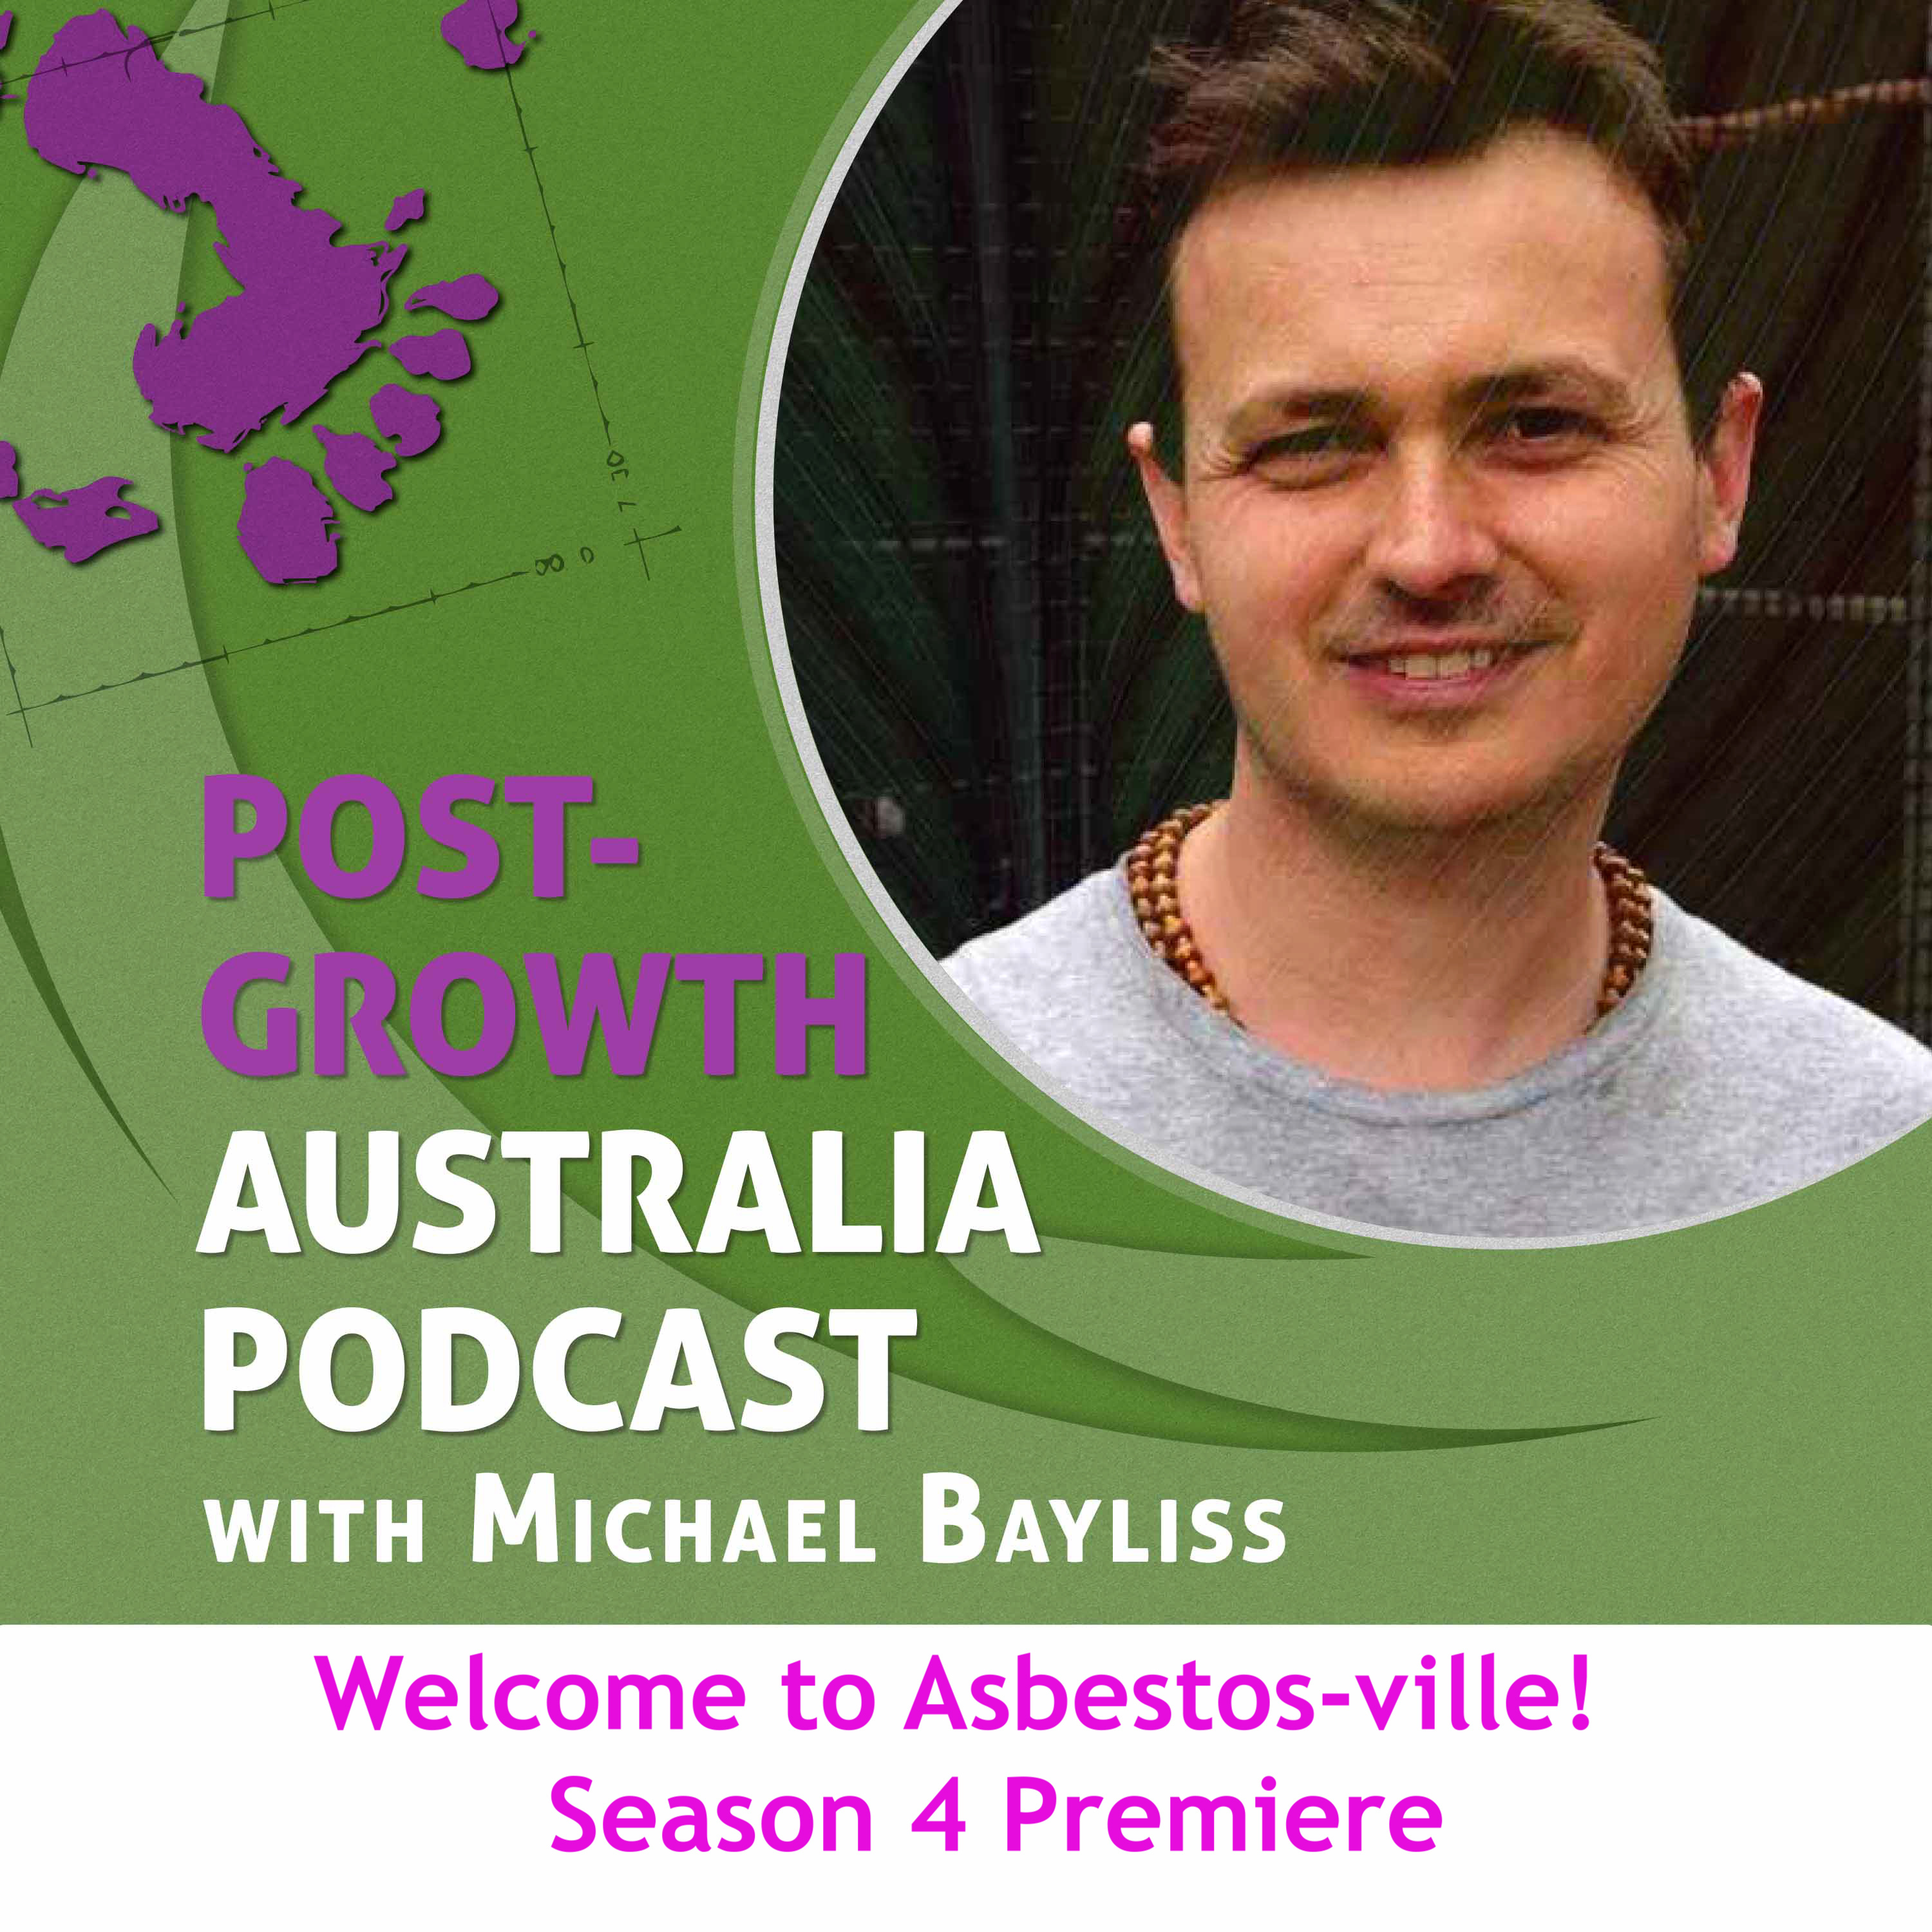 Welcome to Asbestosville!  Season 4 Premiere with Michael Bayliss and Mark Allen